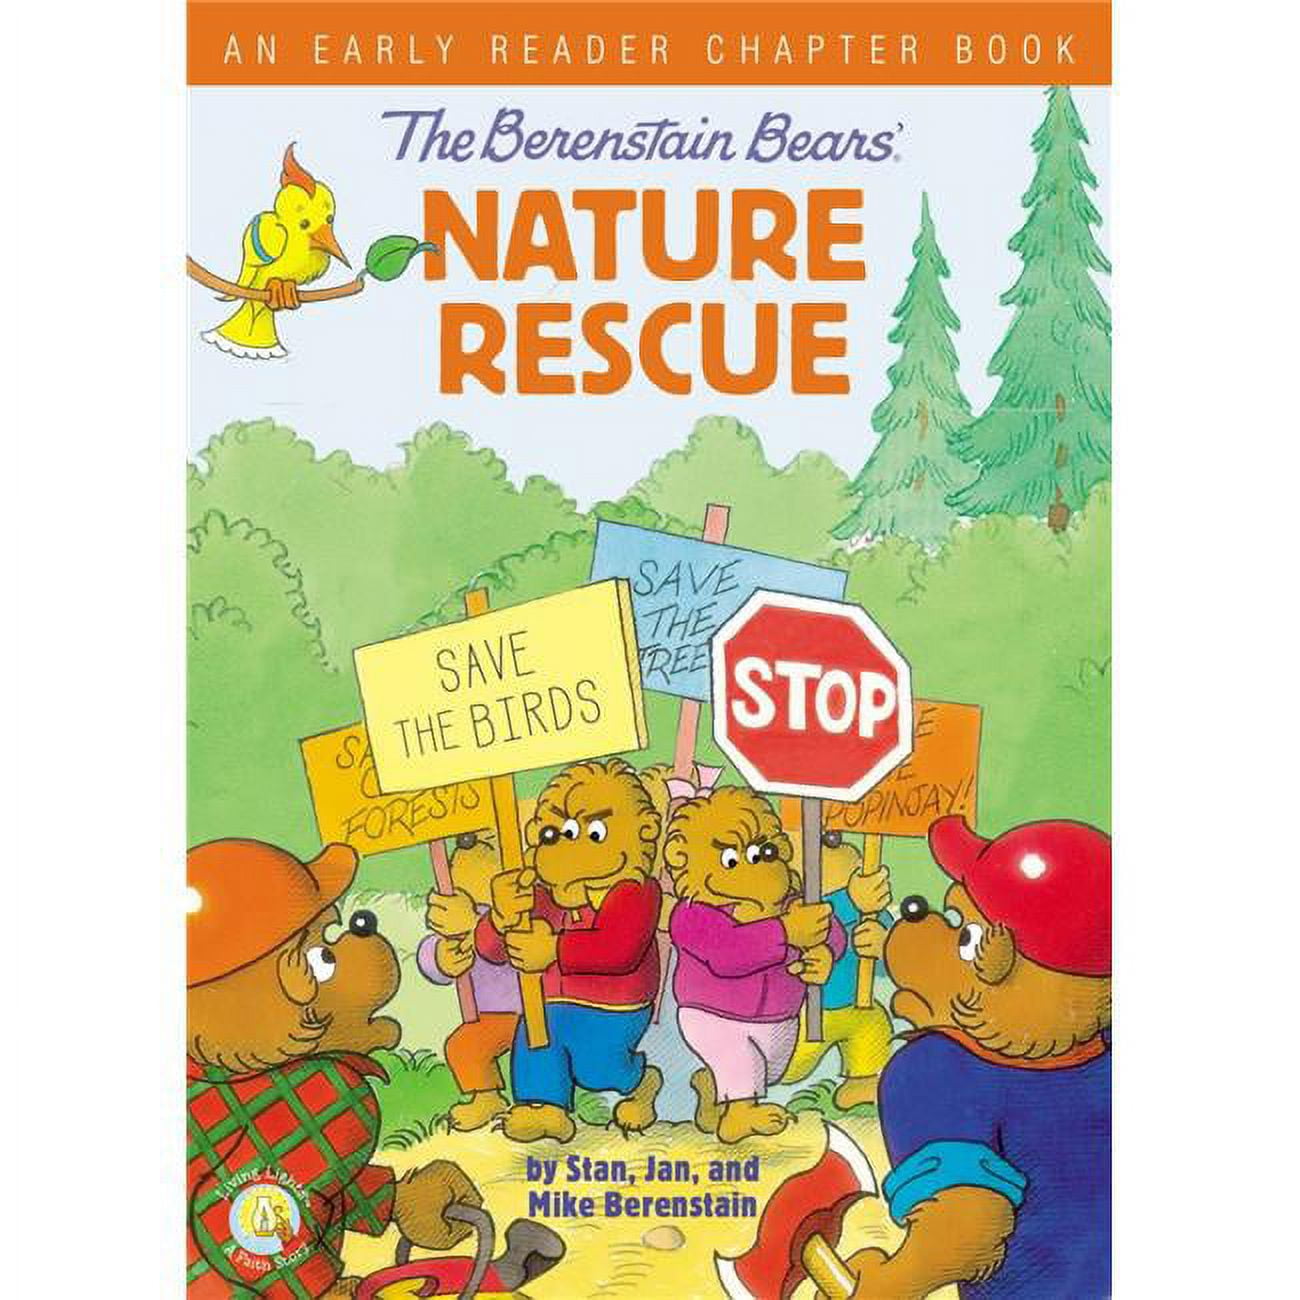 157911 The Berenstain Bears Nature Rescue - Living Lights Softcover - Mar 2020